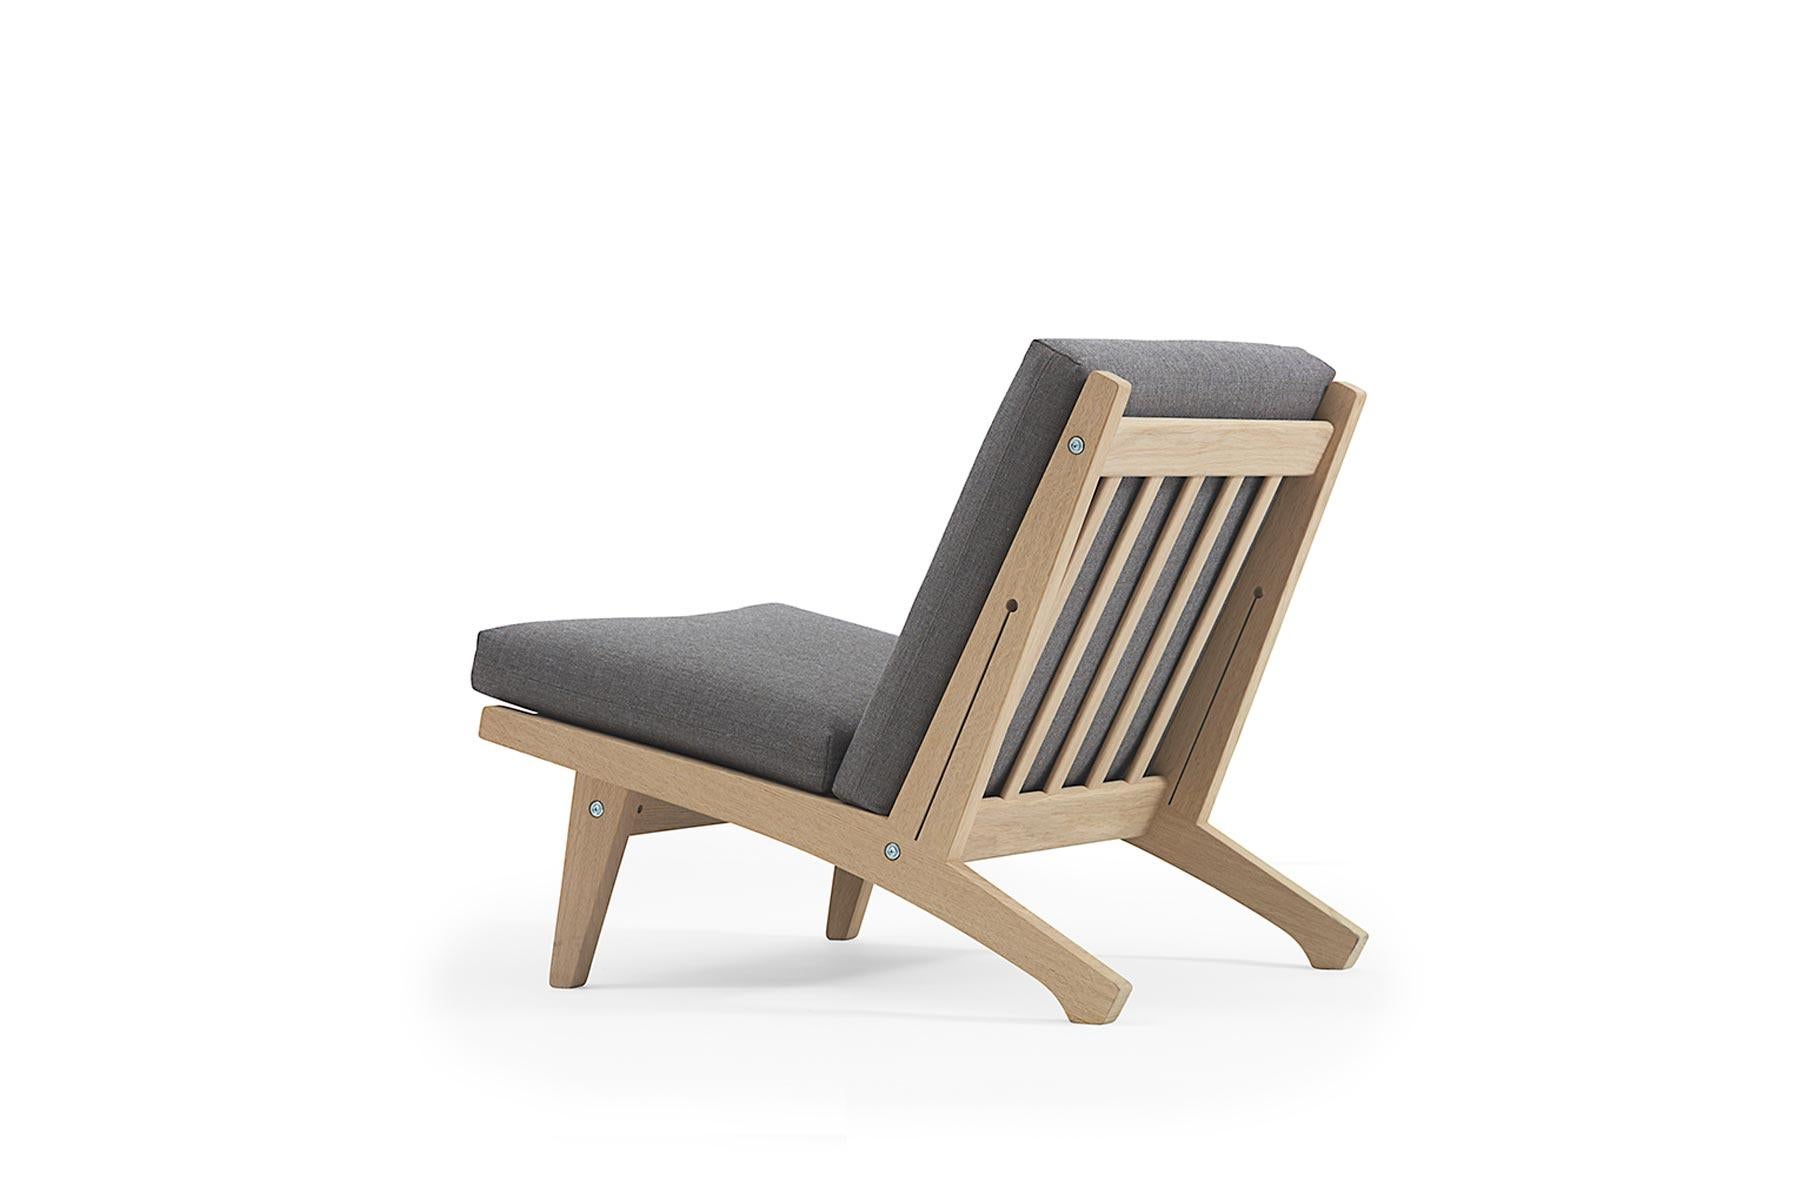 Designed in 1969 by Hans Wegner, the 370 lounge chair pairs clean lines with remarkable craftsmanship. The chair is handcrafted at GETAMA’s factory in Gedsted, Denmark by skilled cabinetmakers using traditional Scandinavian techniques.

 